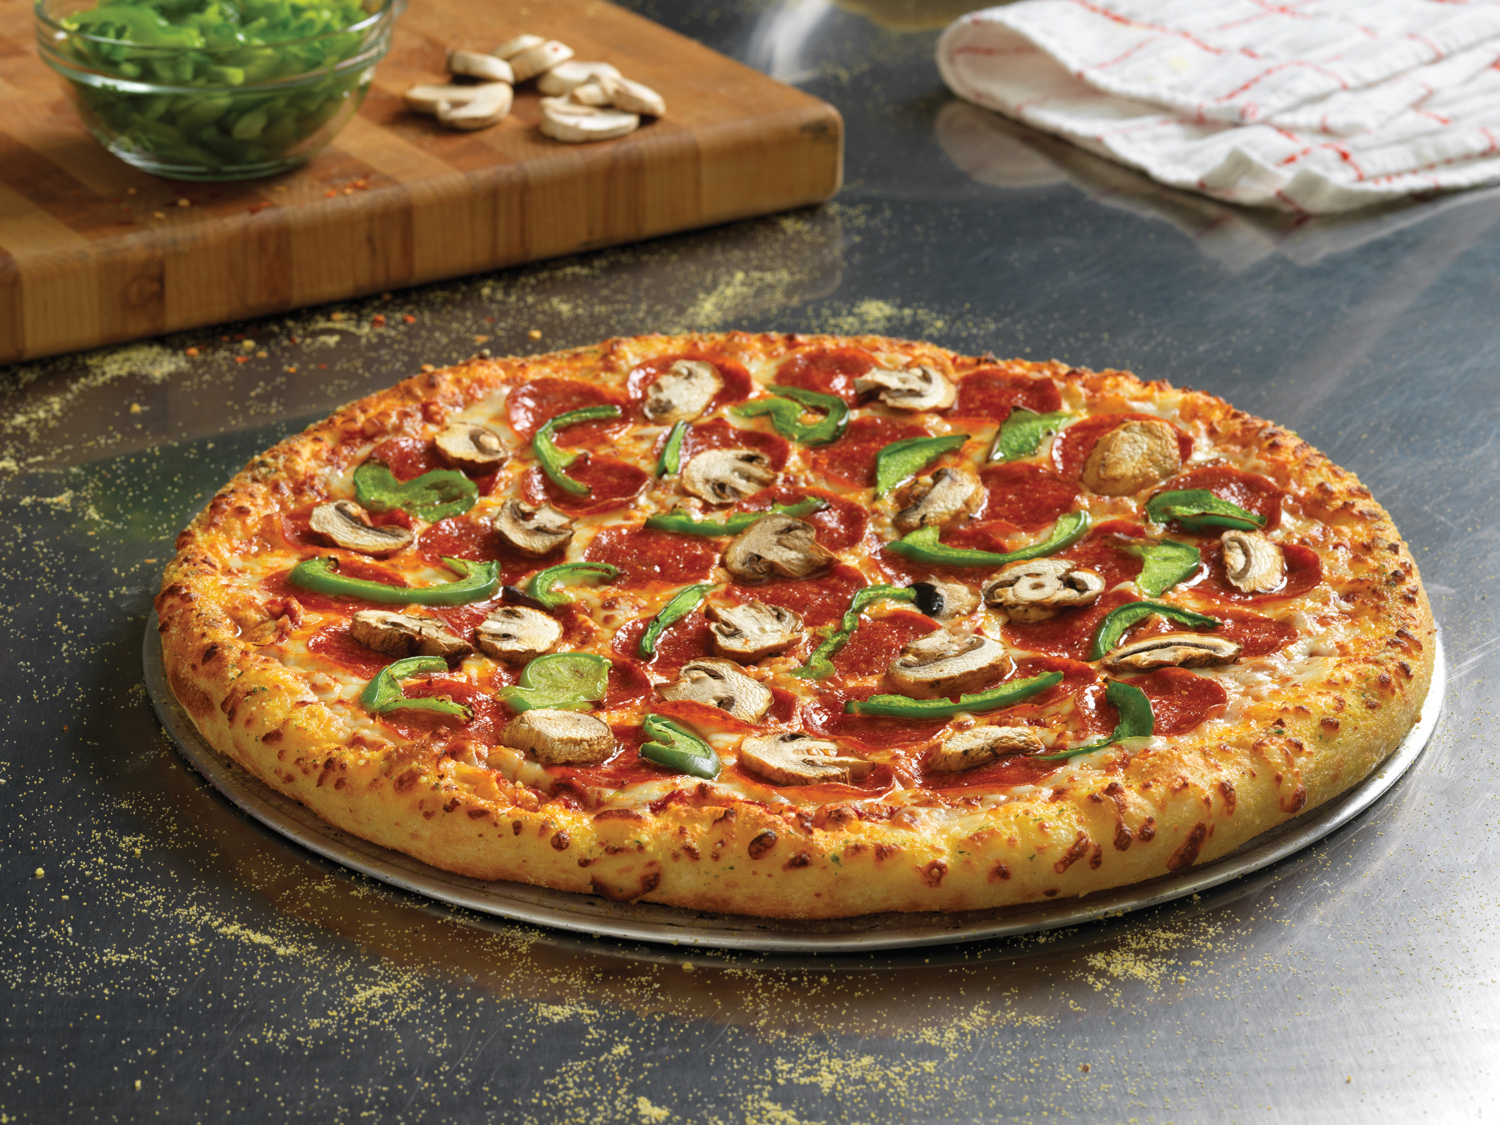 Domino's hand-tossed pepperoni pizza with mushrooms and green peppers